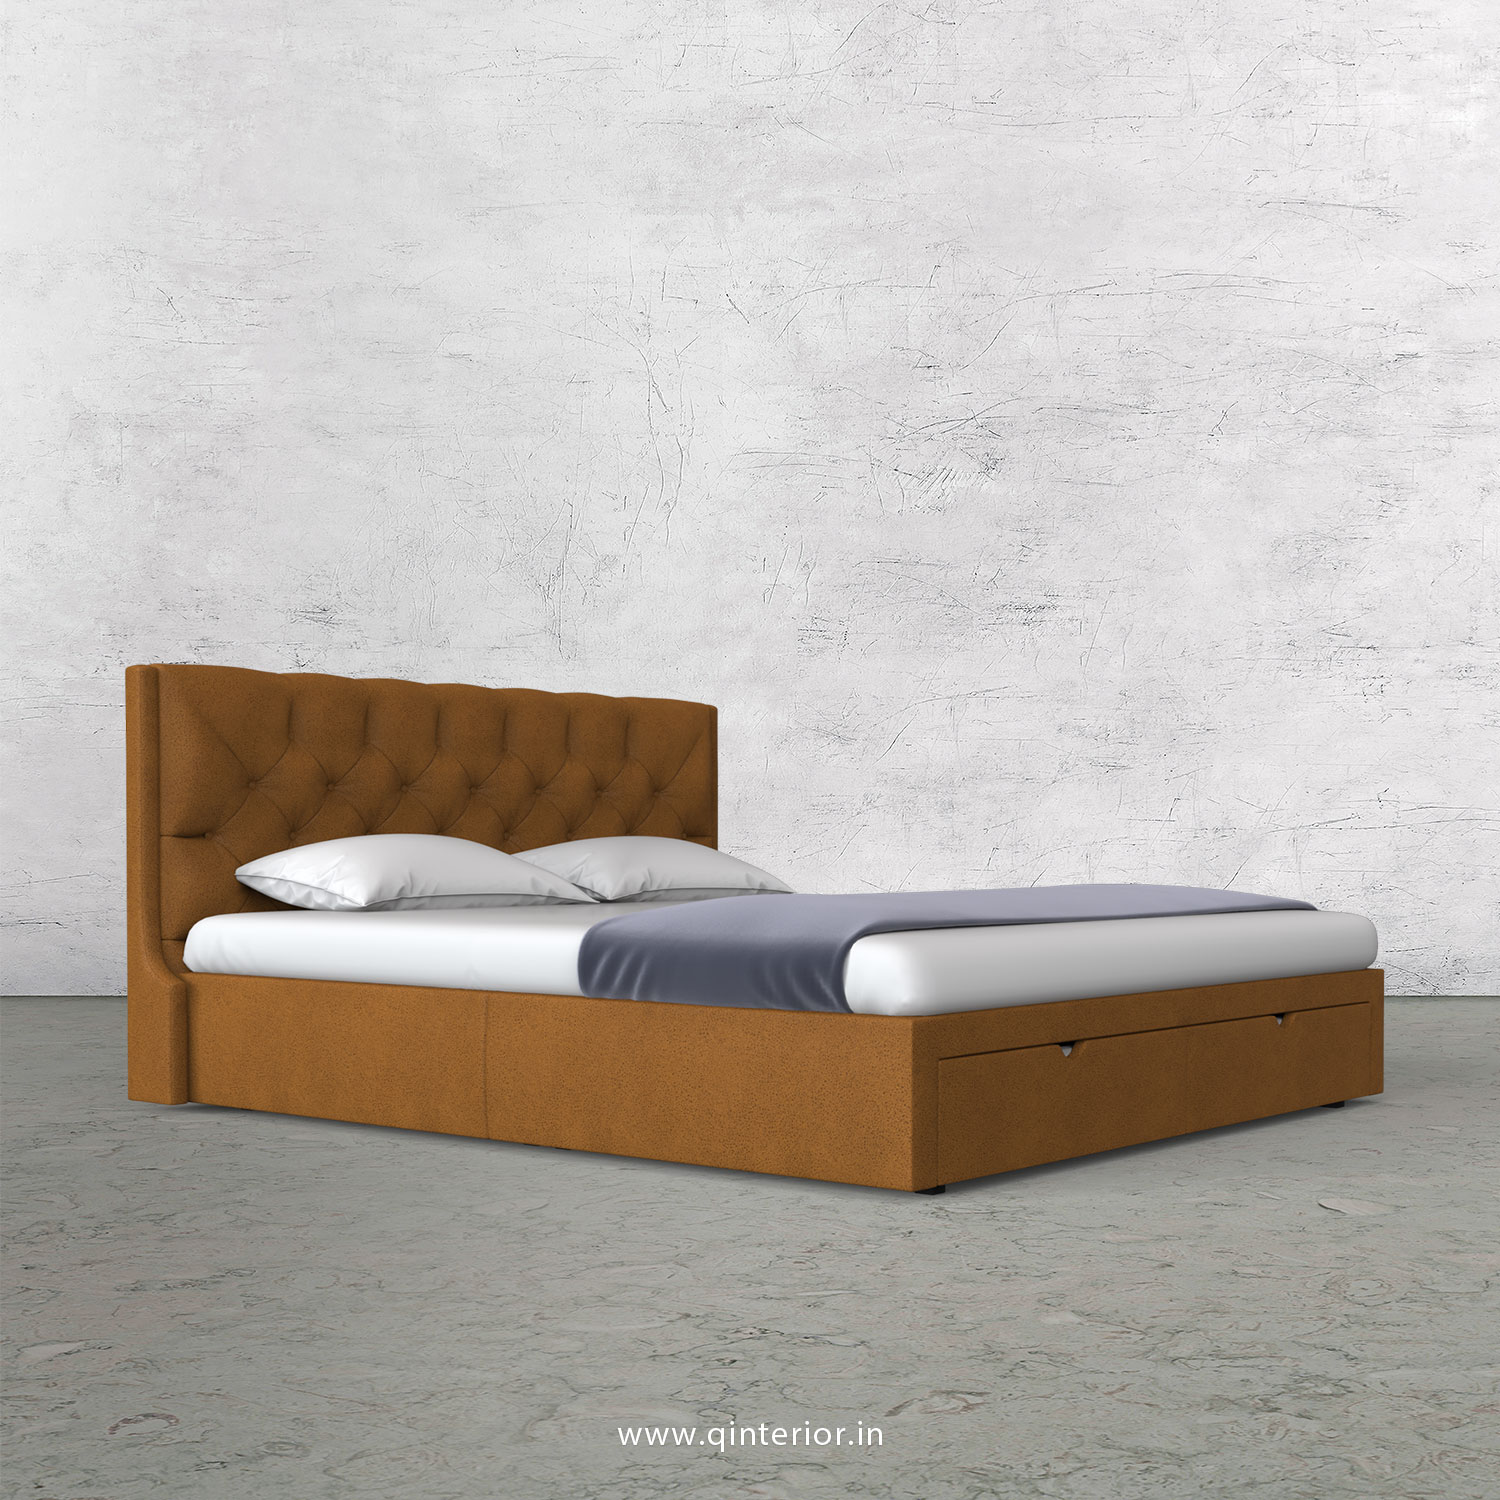 Scorpius King Size Storage Bed in Fab Leather Fabric - KBD001 FL14